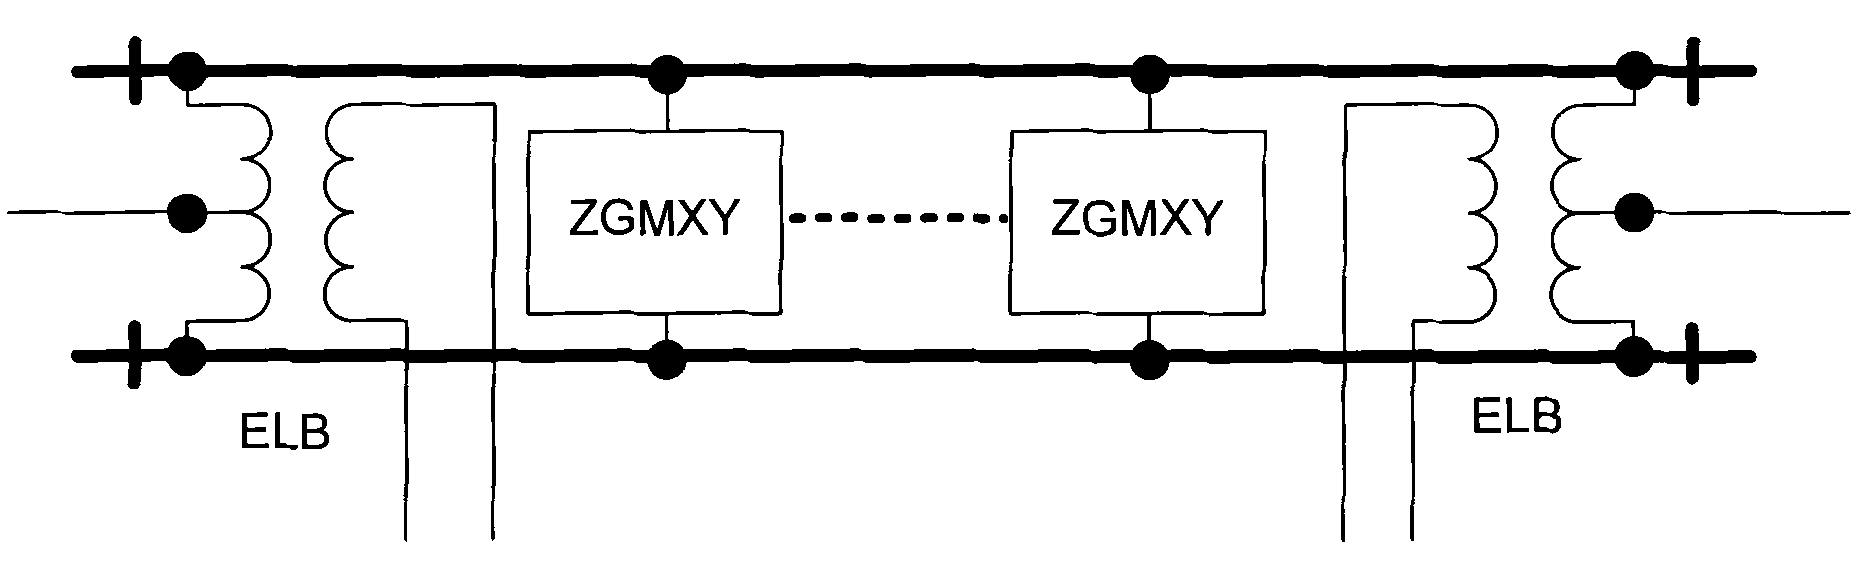 Method for solving problem of poor shunting of track circuit